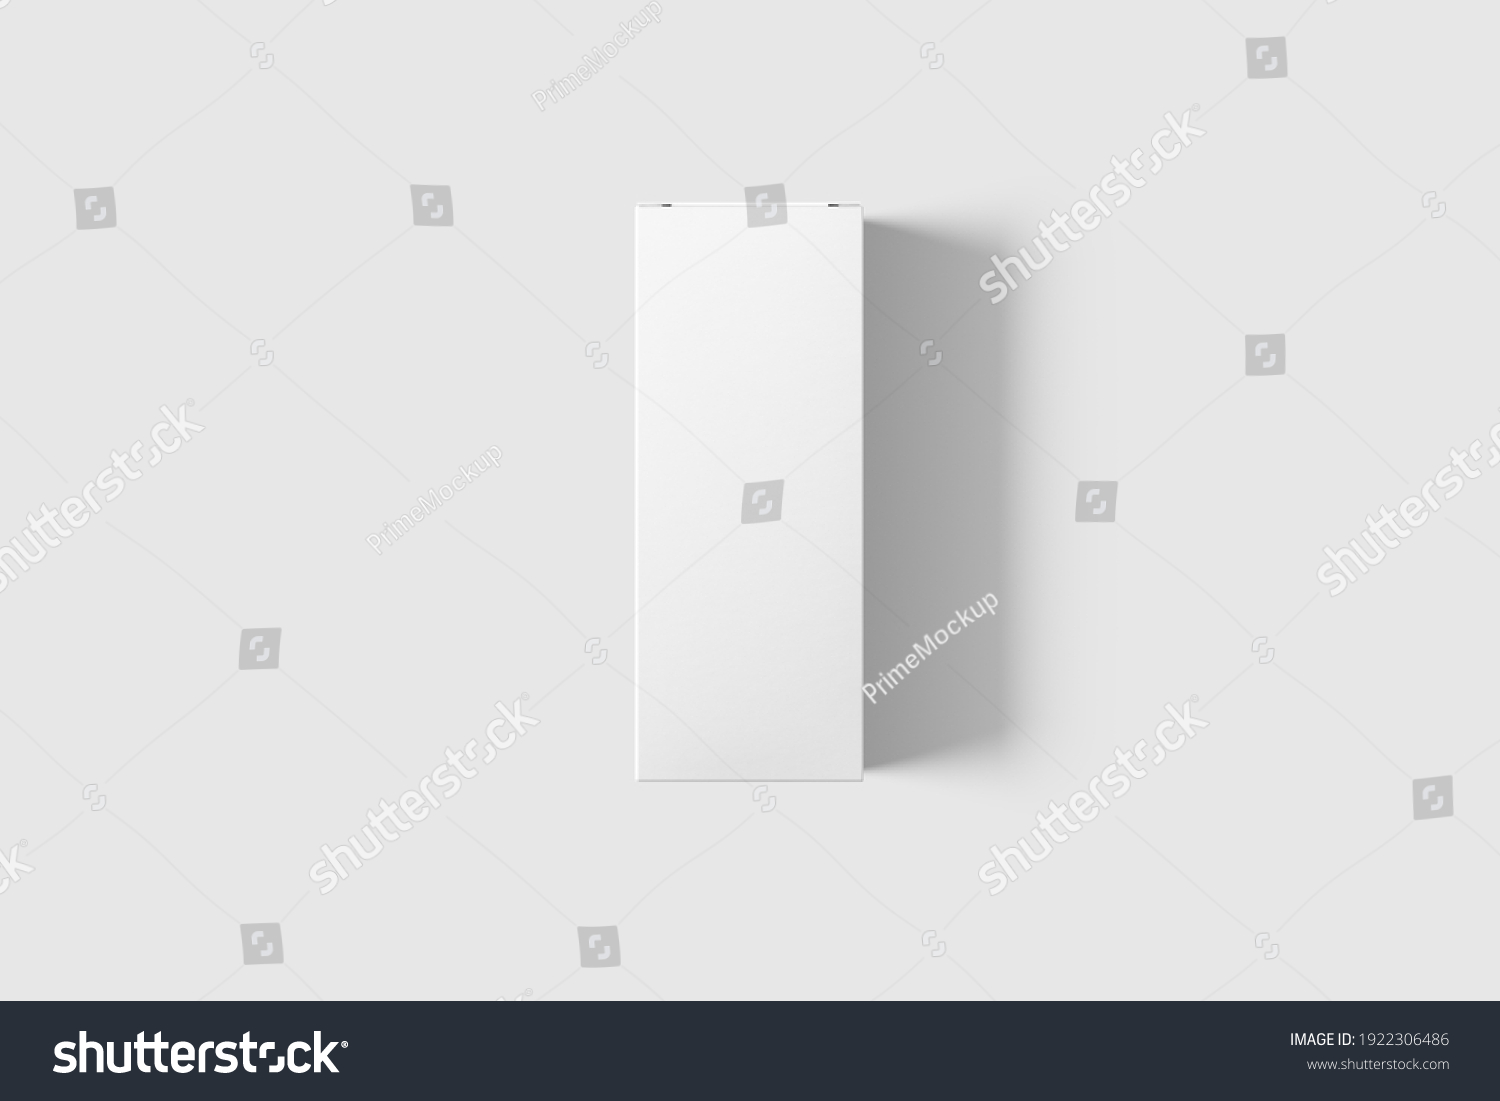 Real photo, Amber Glass Dropper Bottle and Box mockup template isolated on light grey background. High resolution. #1922306486